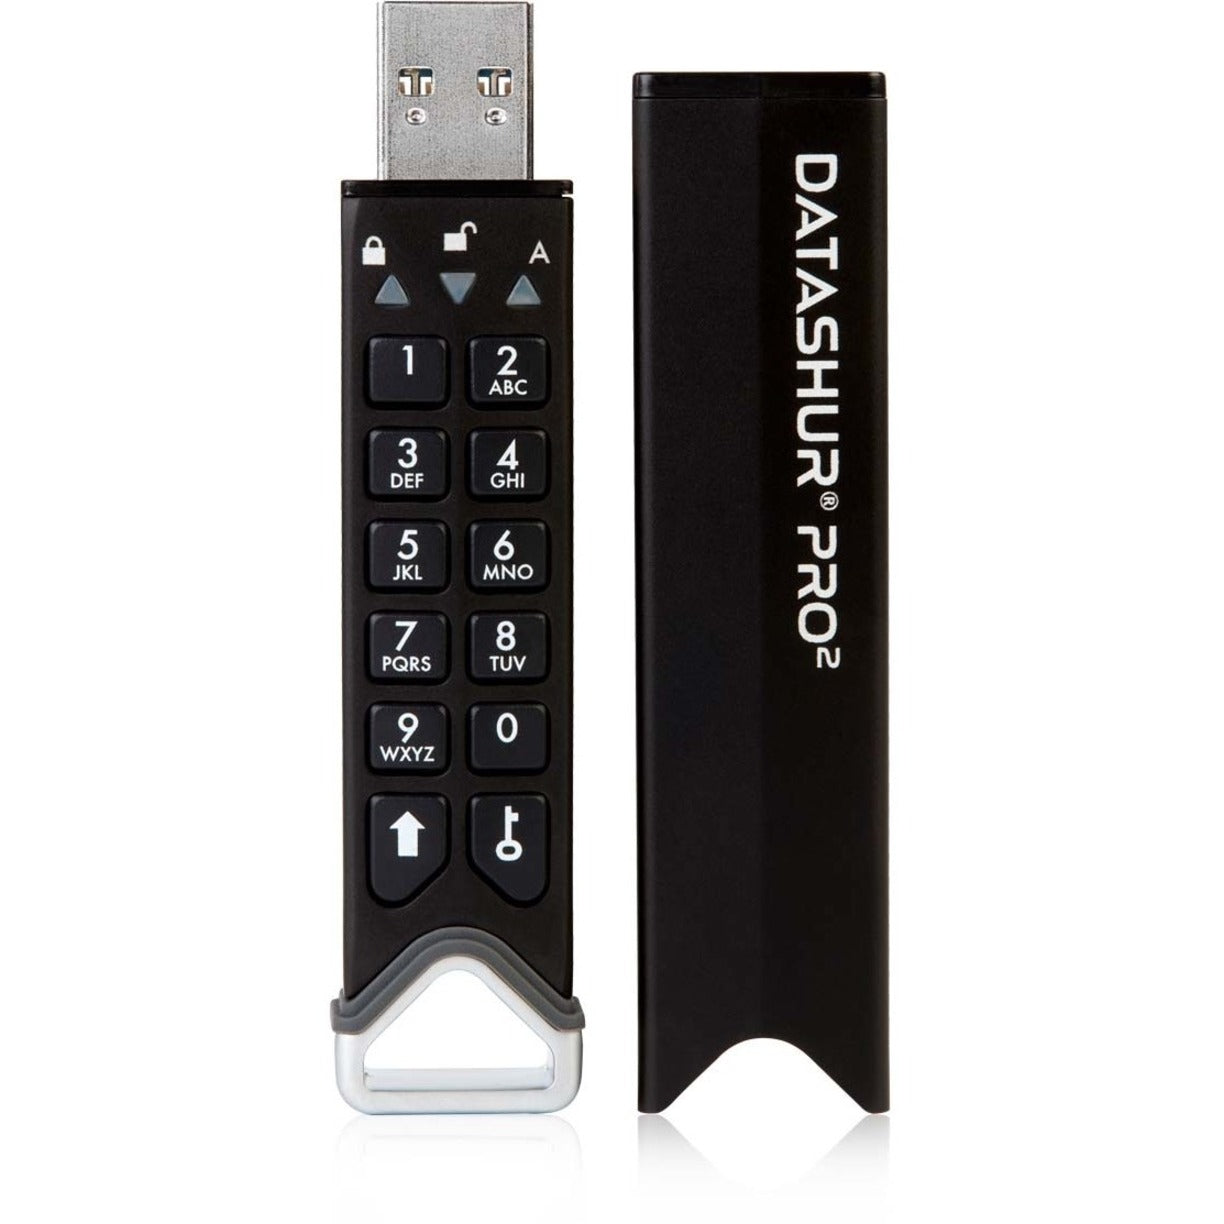 iStorage IS-FL-DP2-256-64 datAshur PRO² 64GB USB 3.2 (Gen 1) Type A Flash Drive, Secure, FIPS 140-2 Level 3 Certified, Password Protected, Dust/Water-Resistant